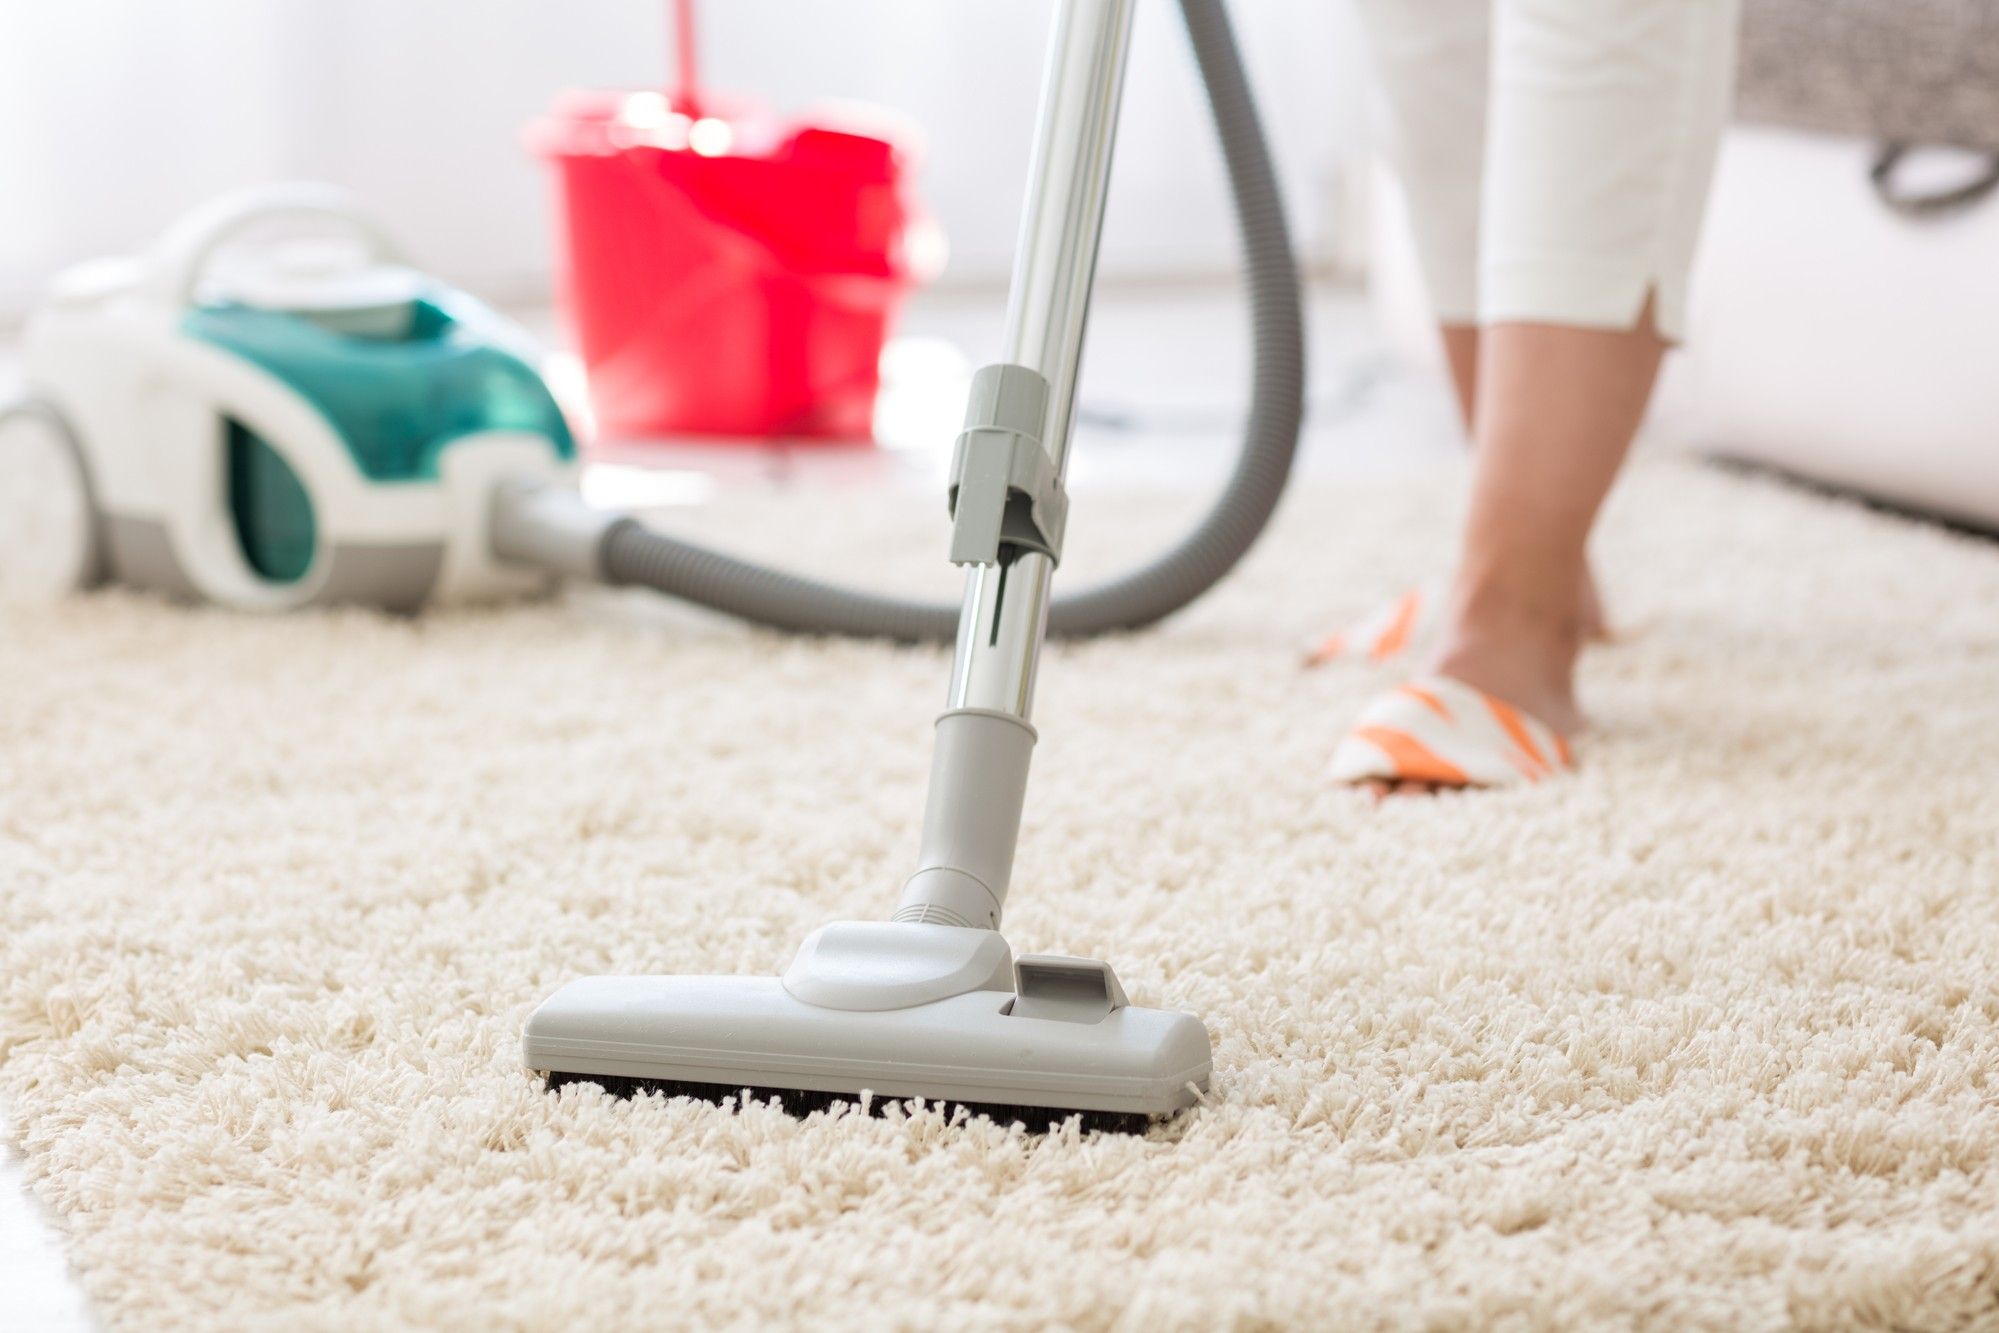 Bissell vacuum cleaners are the subject of consumer complaints